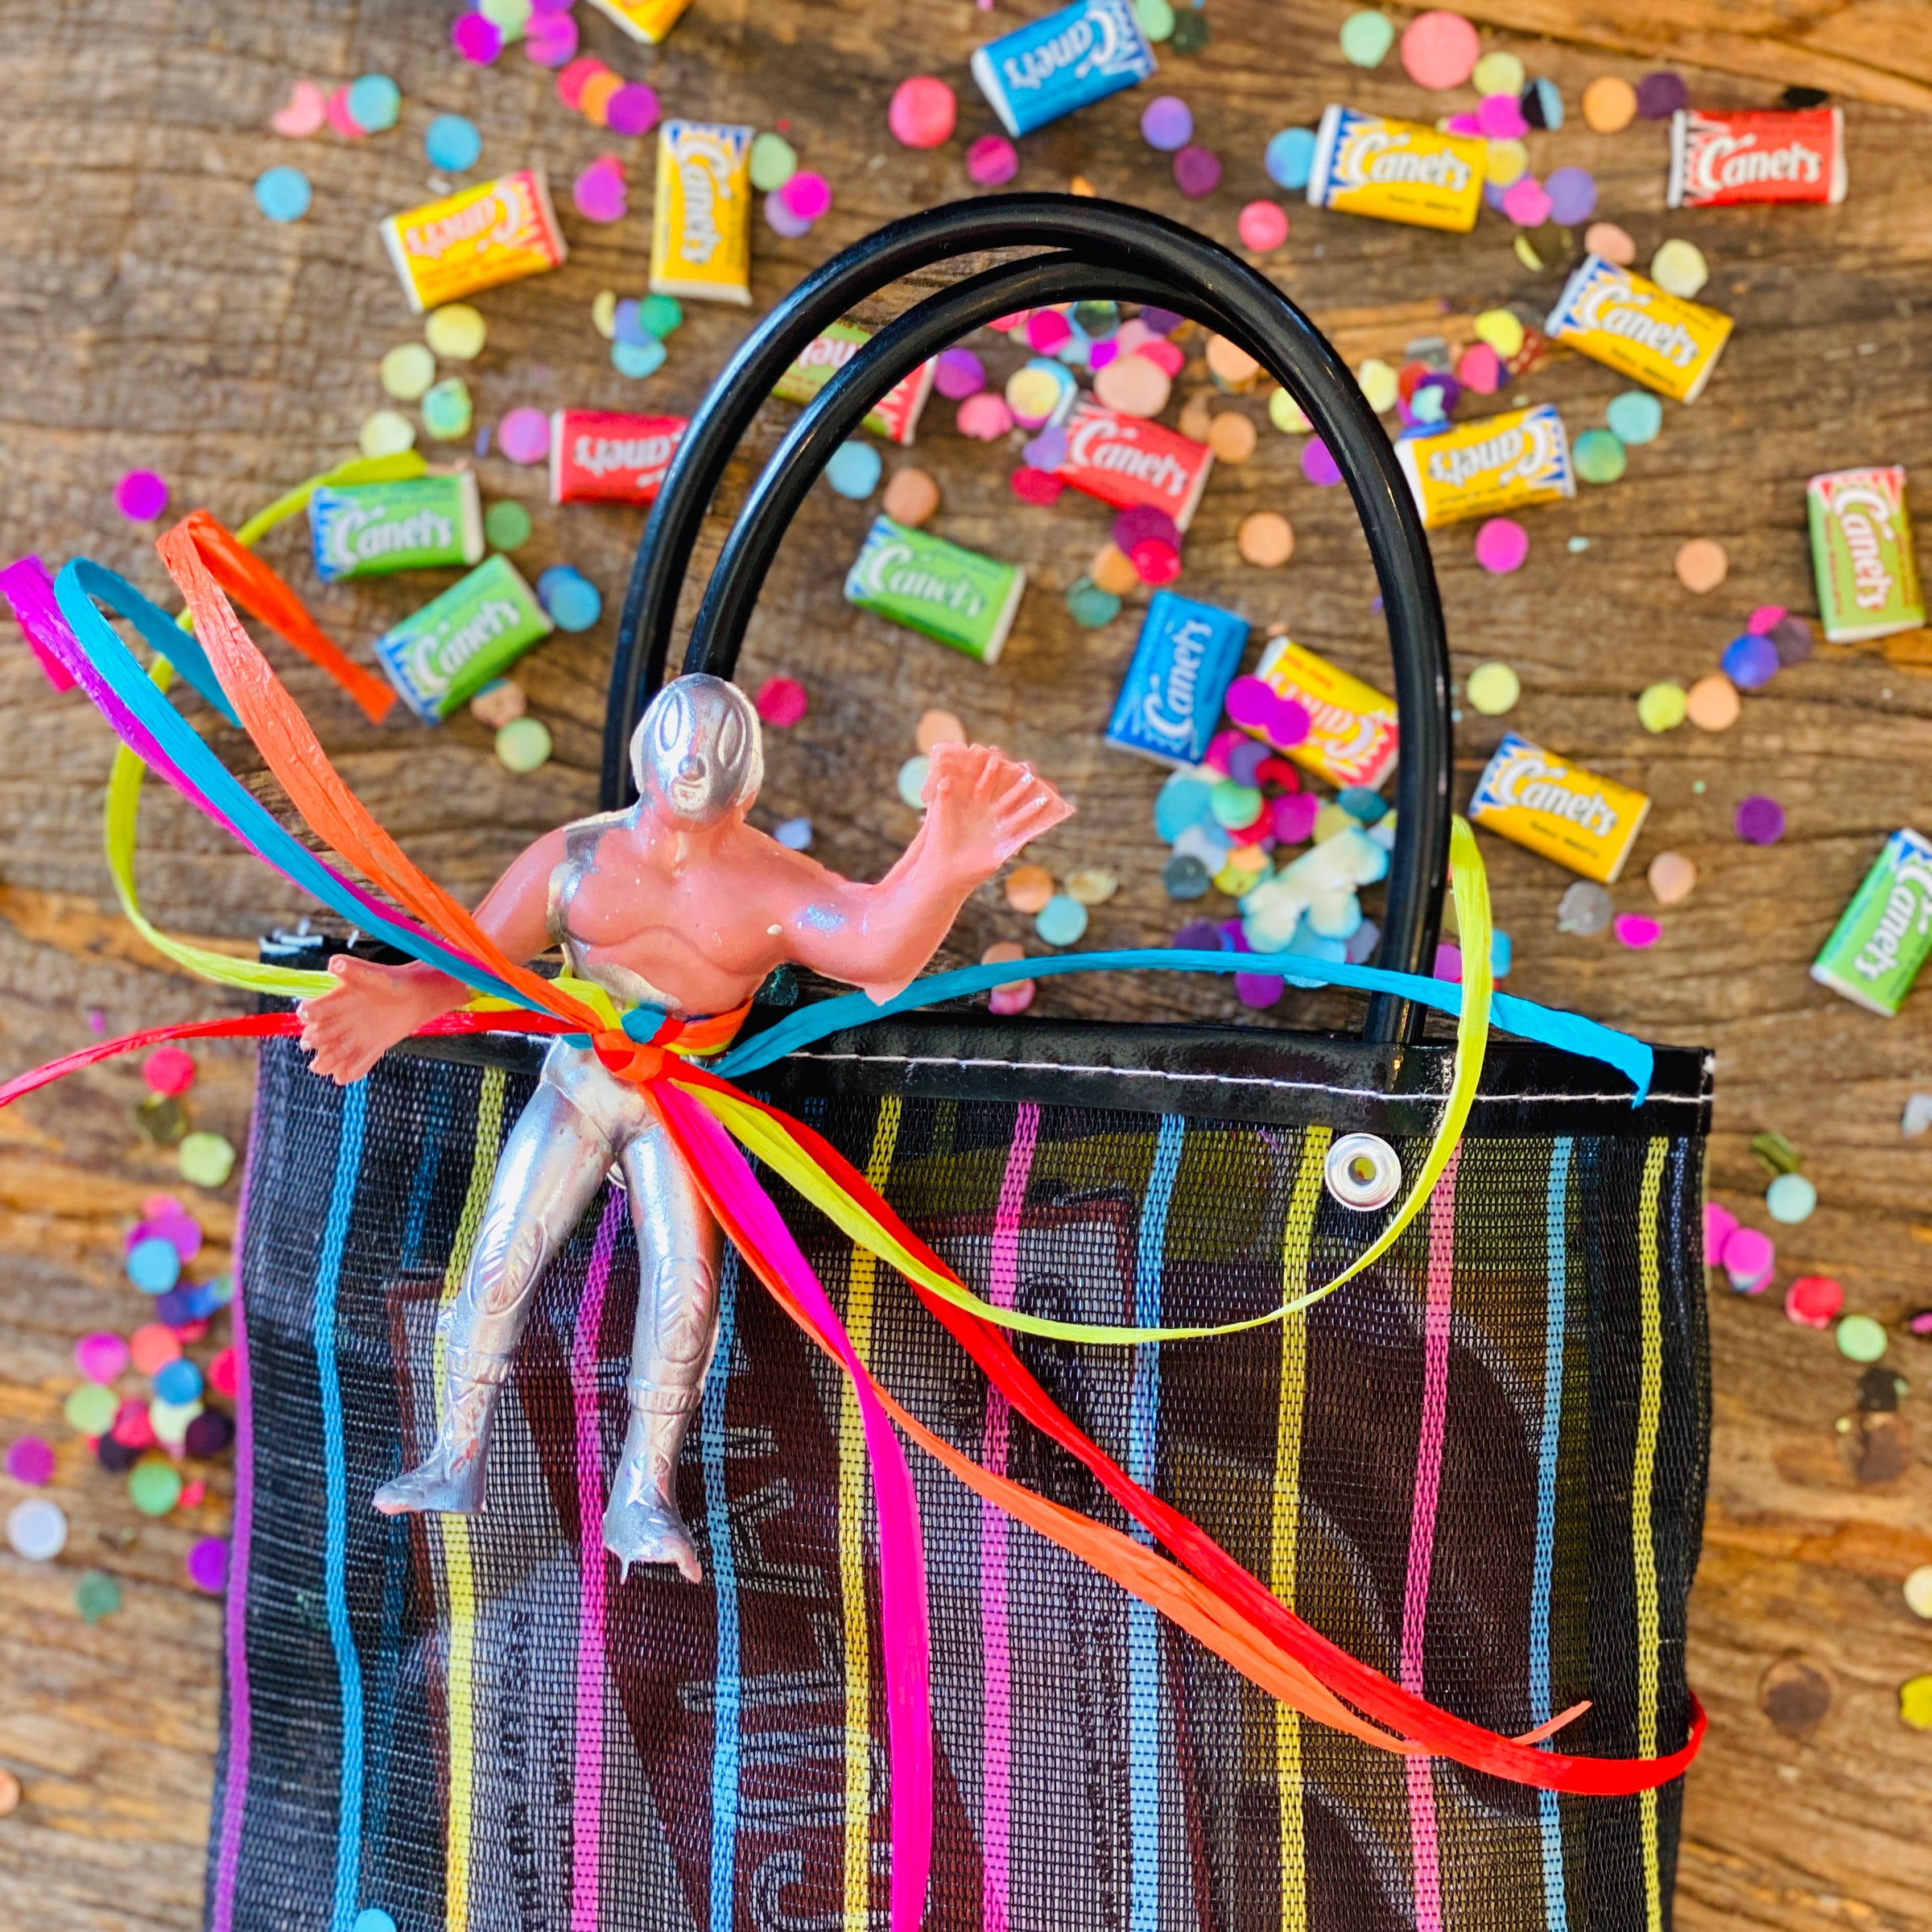 Top view of goodie bag with luchador figure tied to bag strap with colorful bow. Goodie bag on wooden table, sprinkled with confetti and gum.